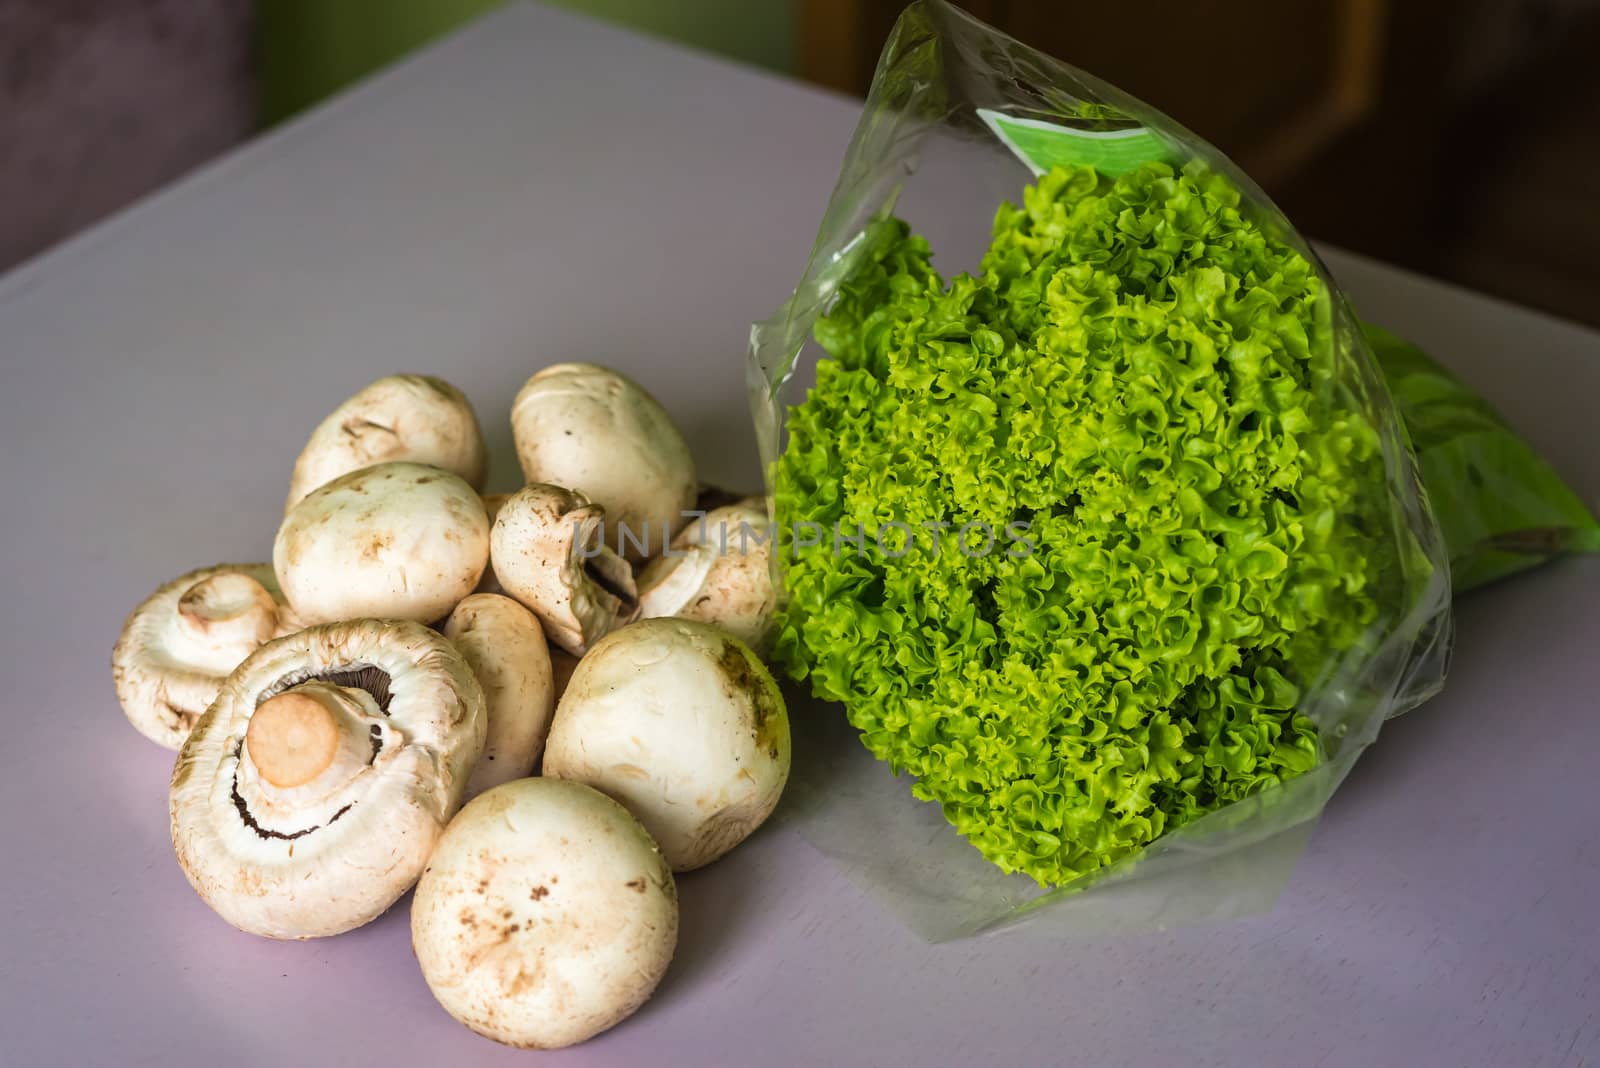 raw and fresh mushrooms and lettuce on the table